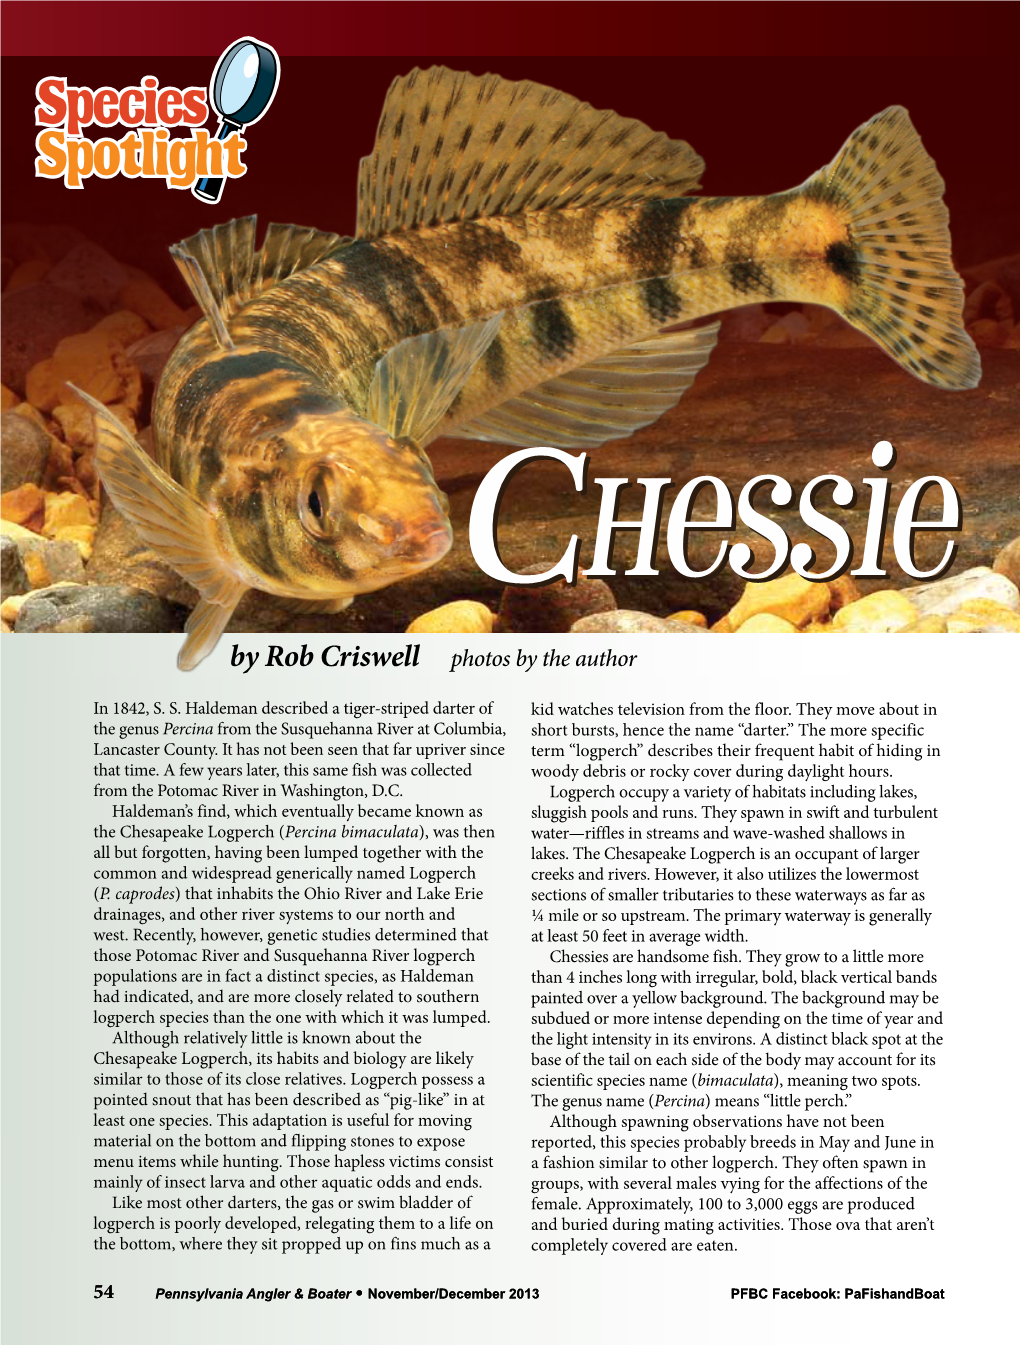 Chesapeake Logperch (Percina Bimaculata), Was Then Water—Riffles in Streams and Wave-Washed Shallows in All but Forgotten, Having Been Lumped Together with the Lakes